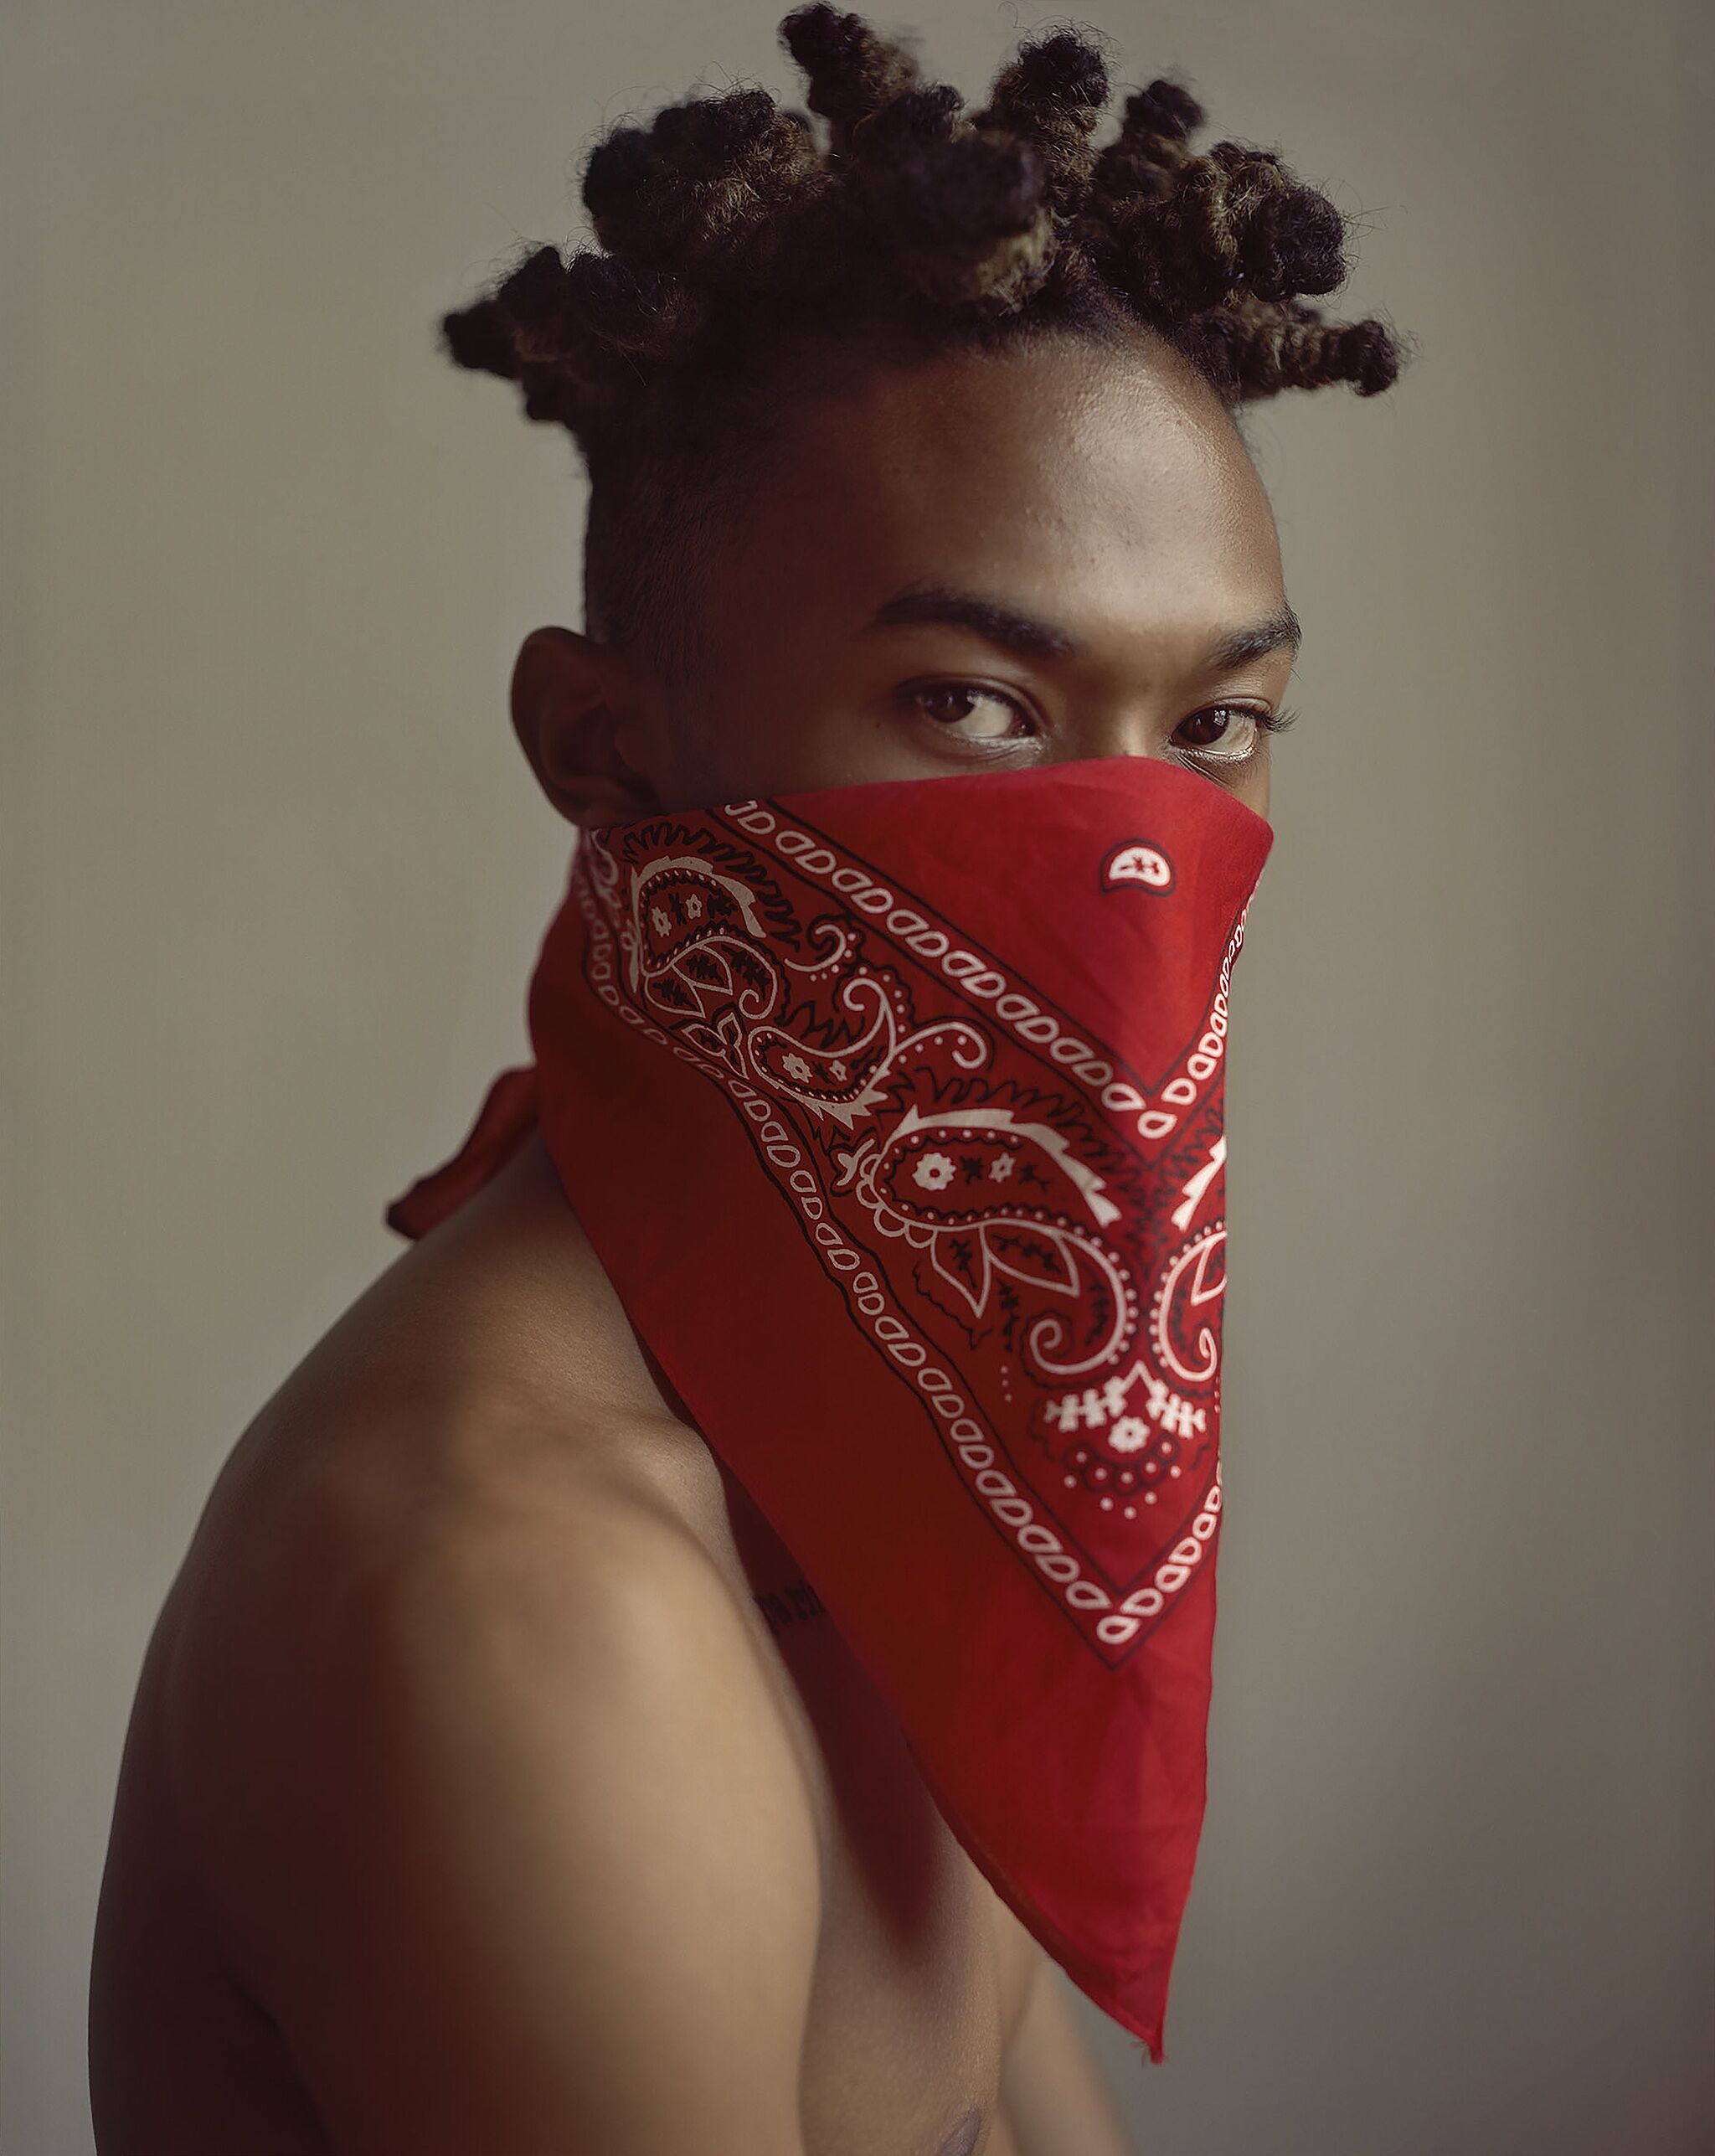 A photograph of a person from the shoulders up wearing a red bandana around the lower half of their face.